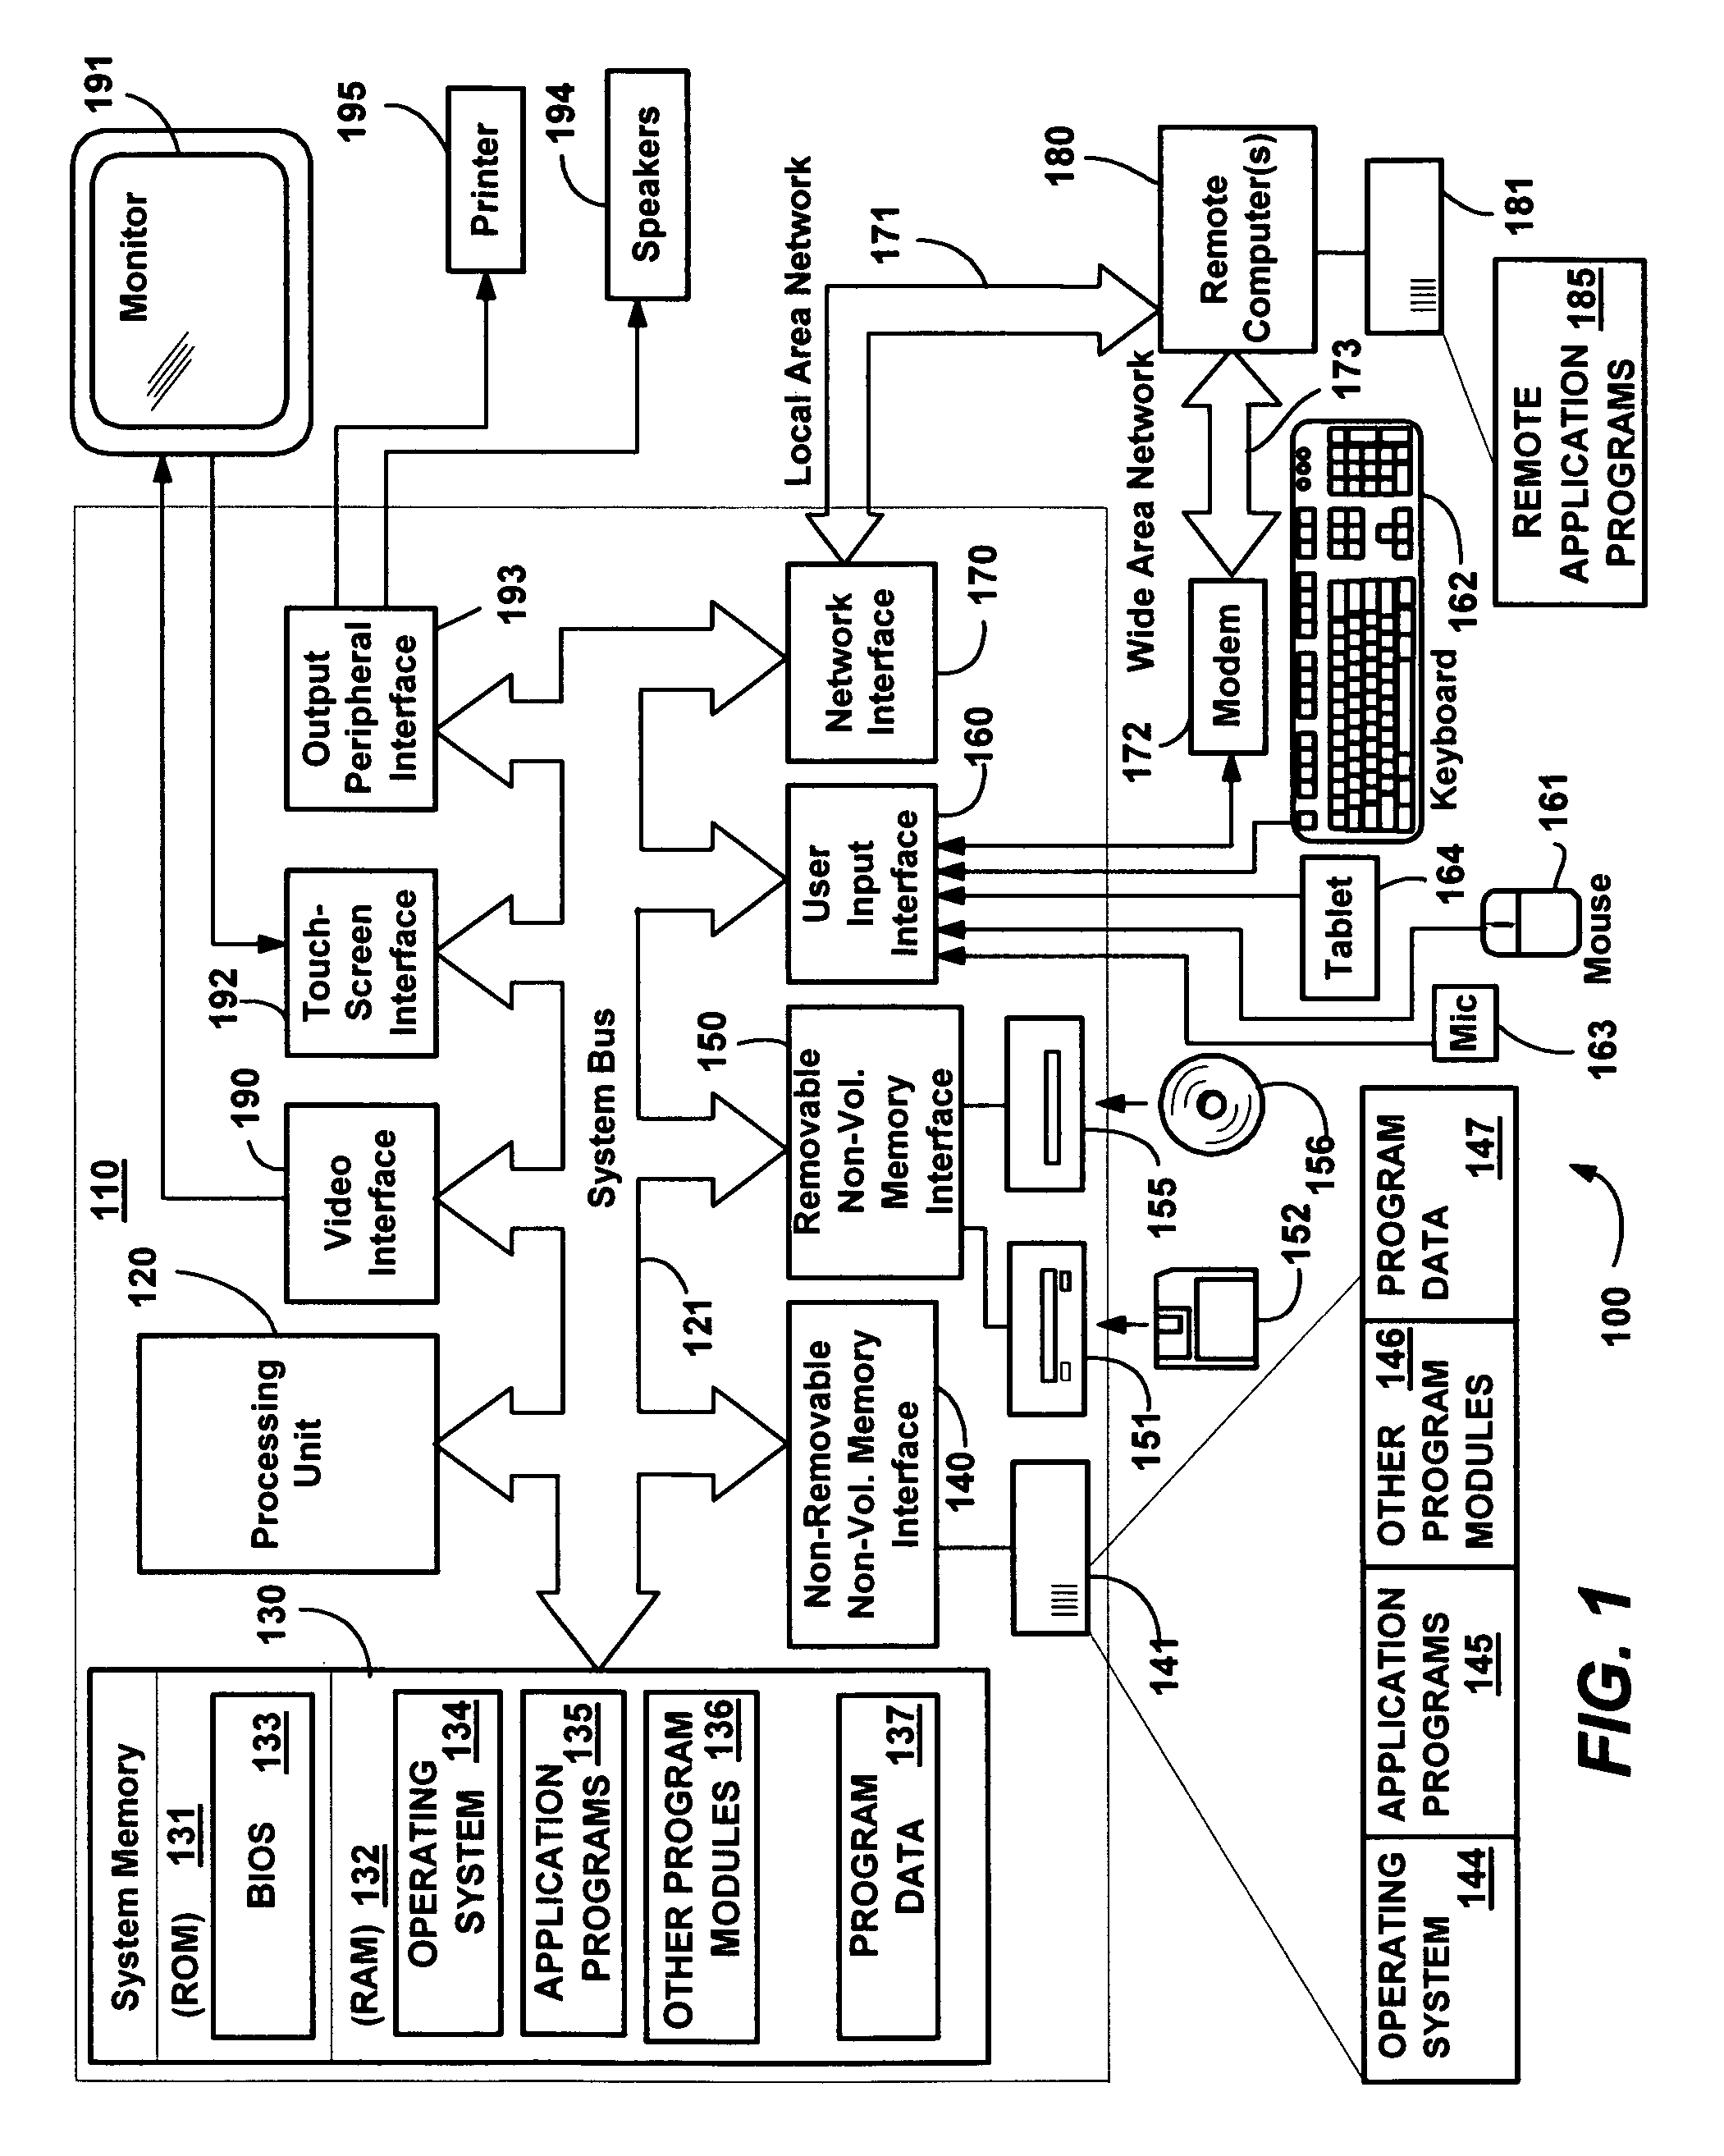 System and method for increasing the available workspace of a graphical user interface